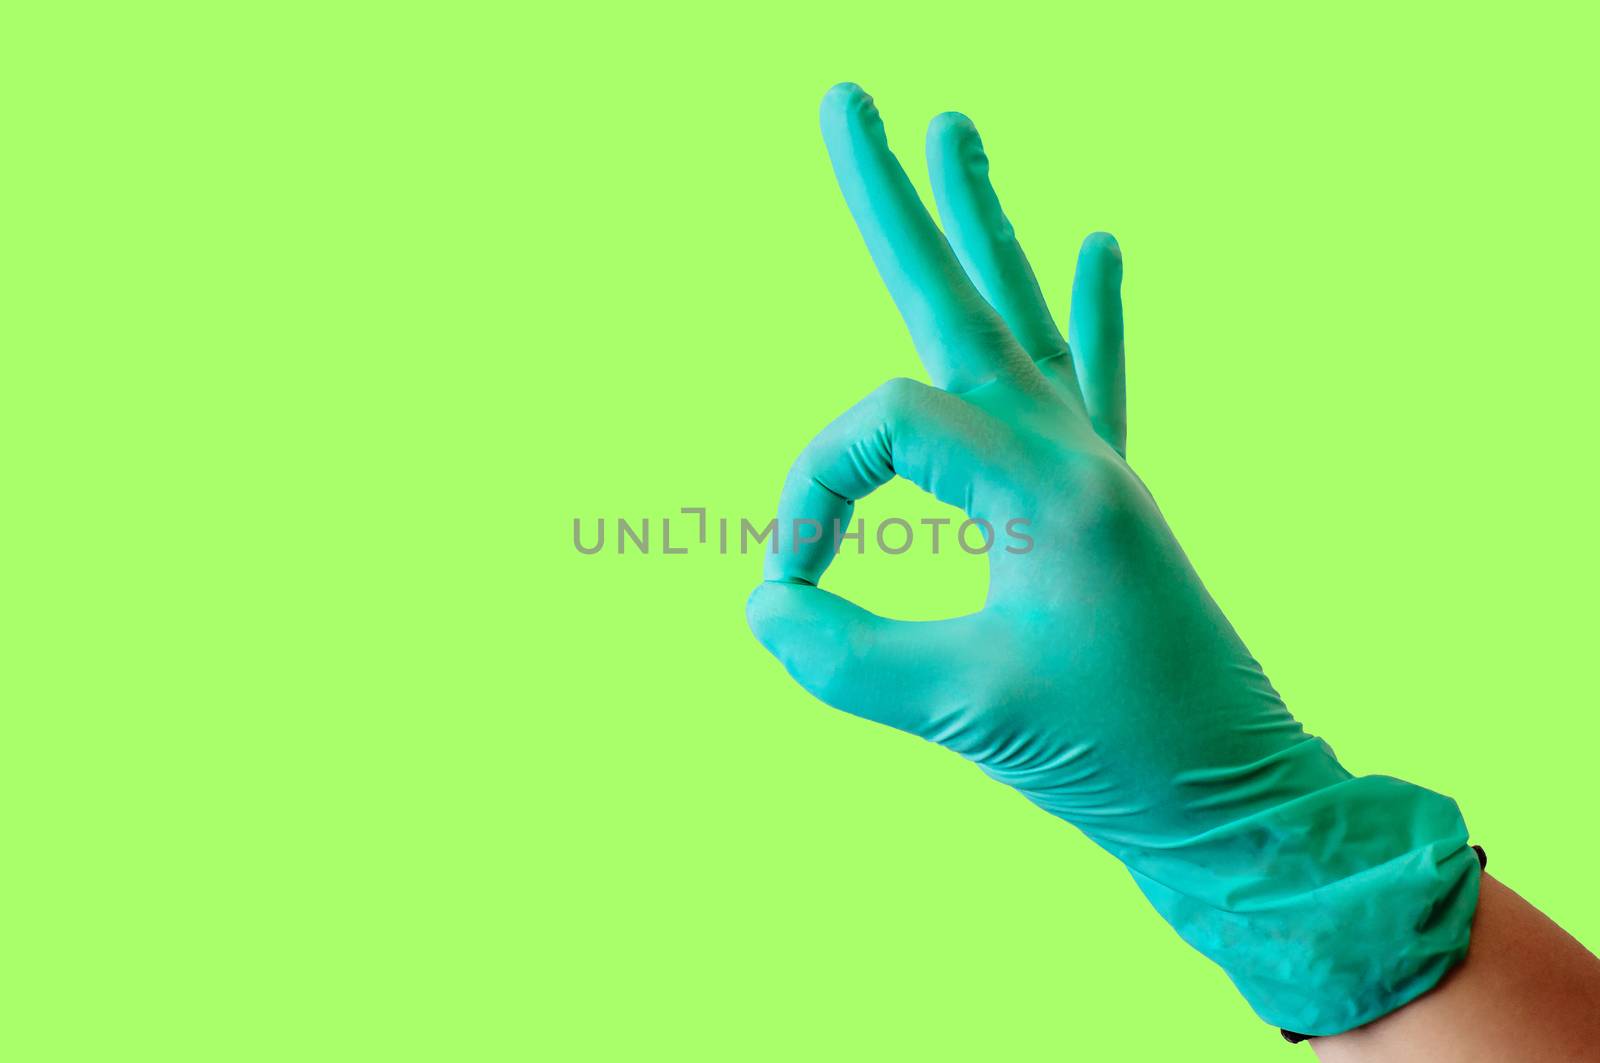 Female hand in blue latex glove makes a gesture resembling a dog with open mouth isolate malachite background. Medical health concept.